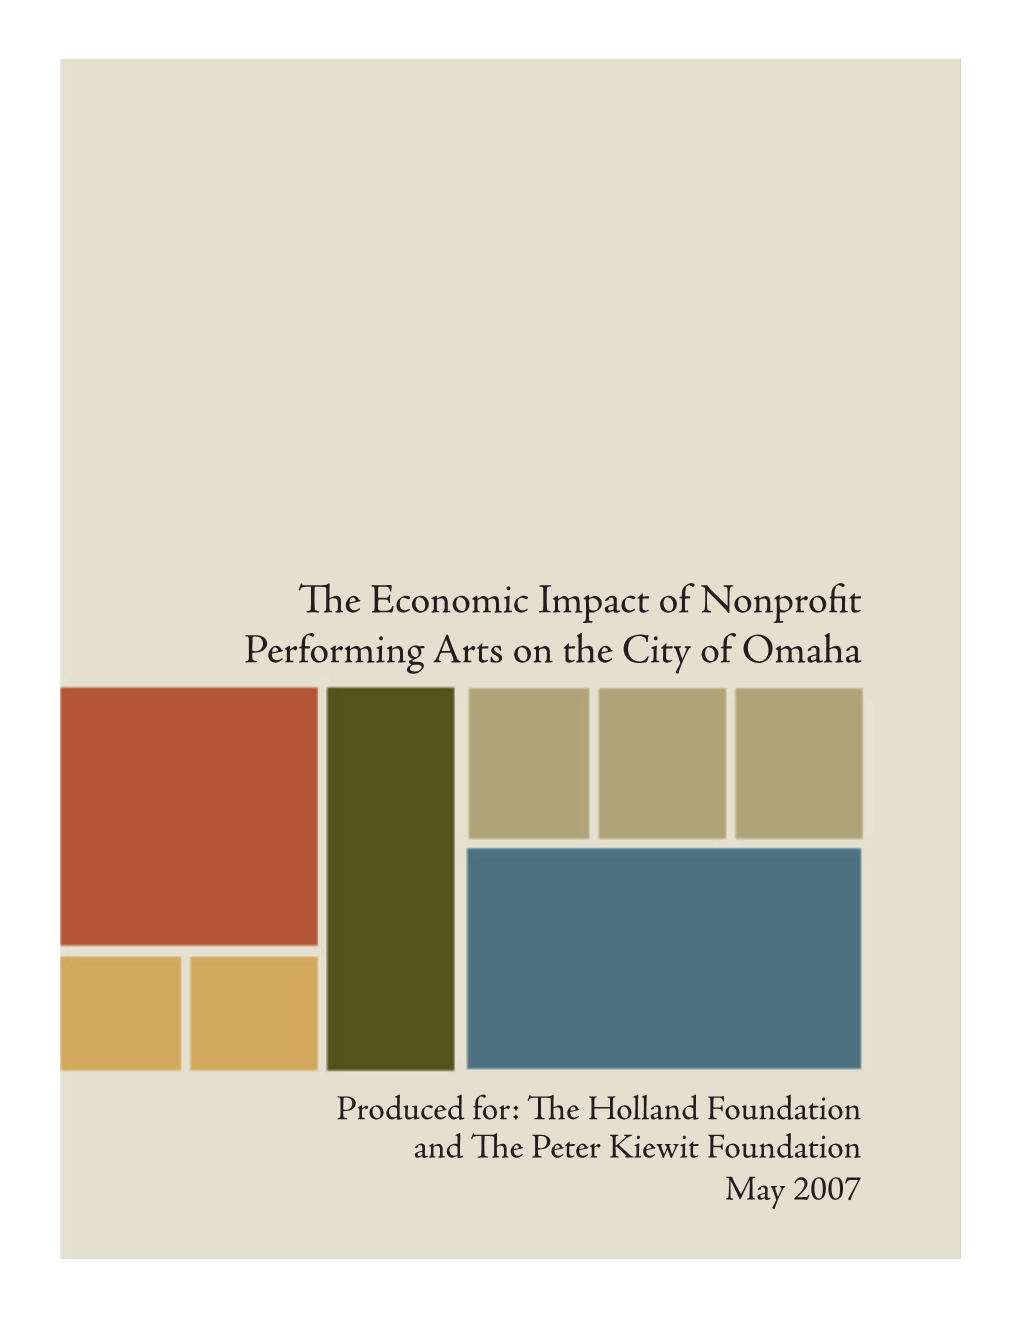 The Economic Impact of Nonprofit Performing Arts on the City of Omaha